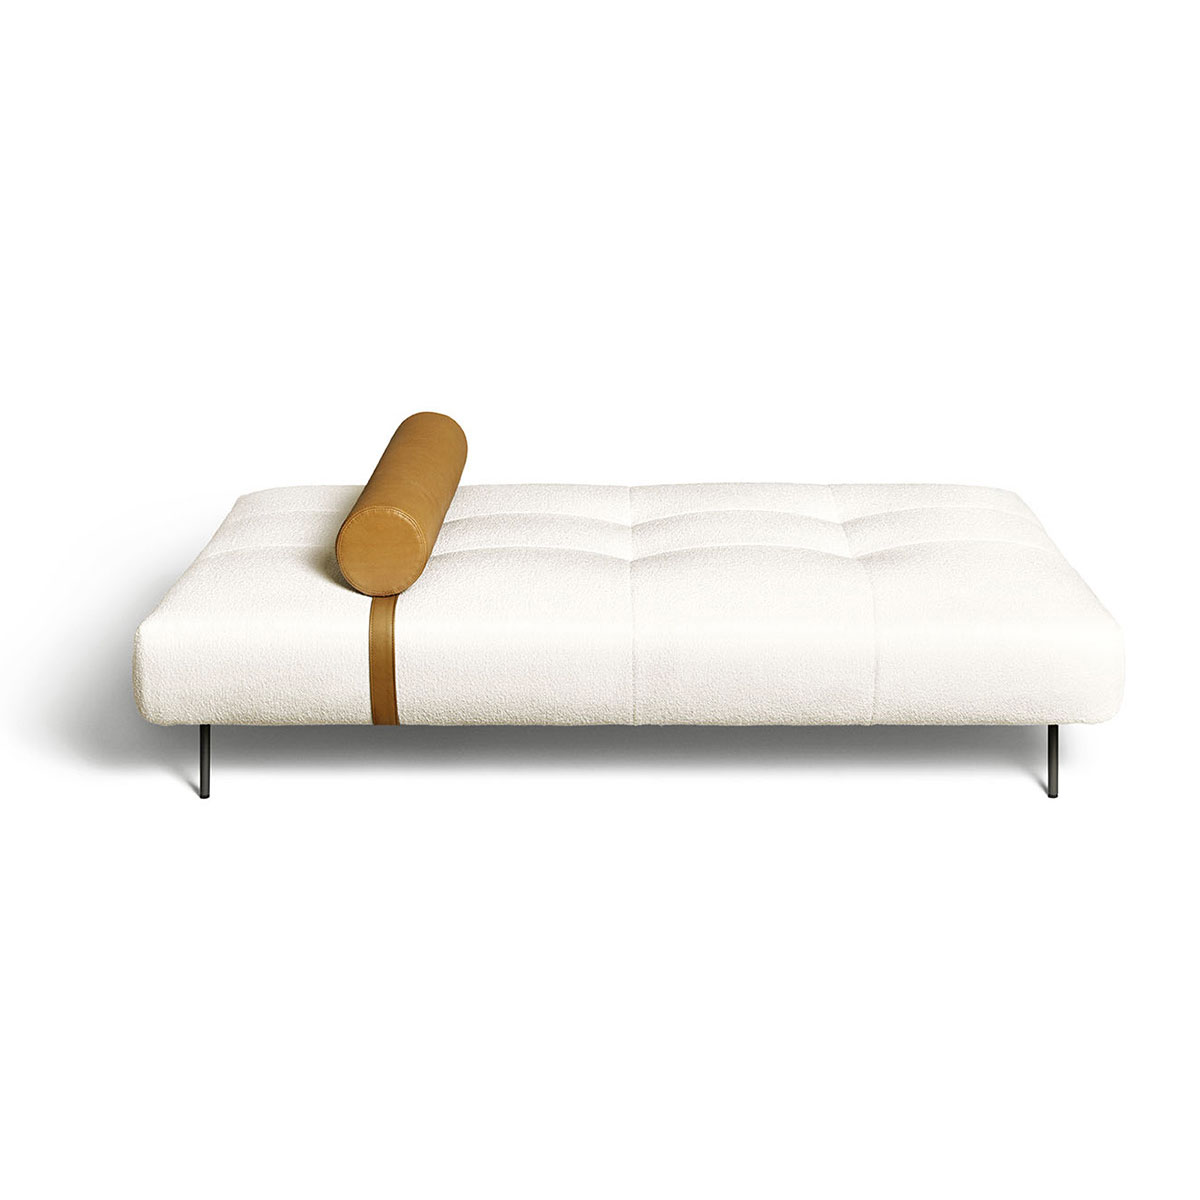 Erei daybed